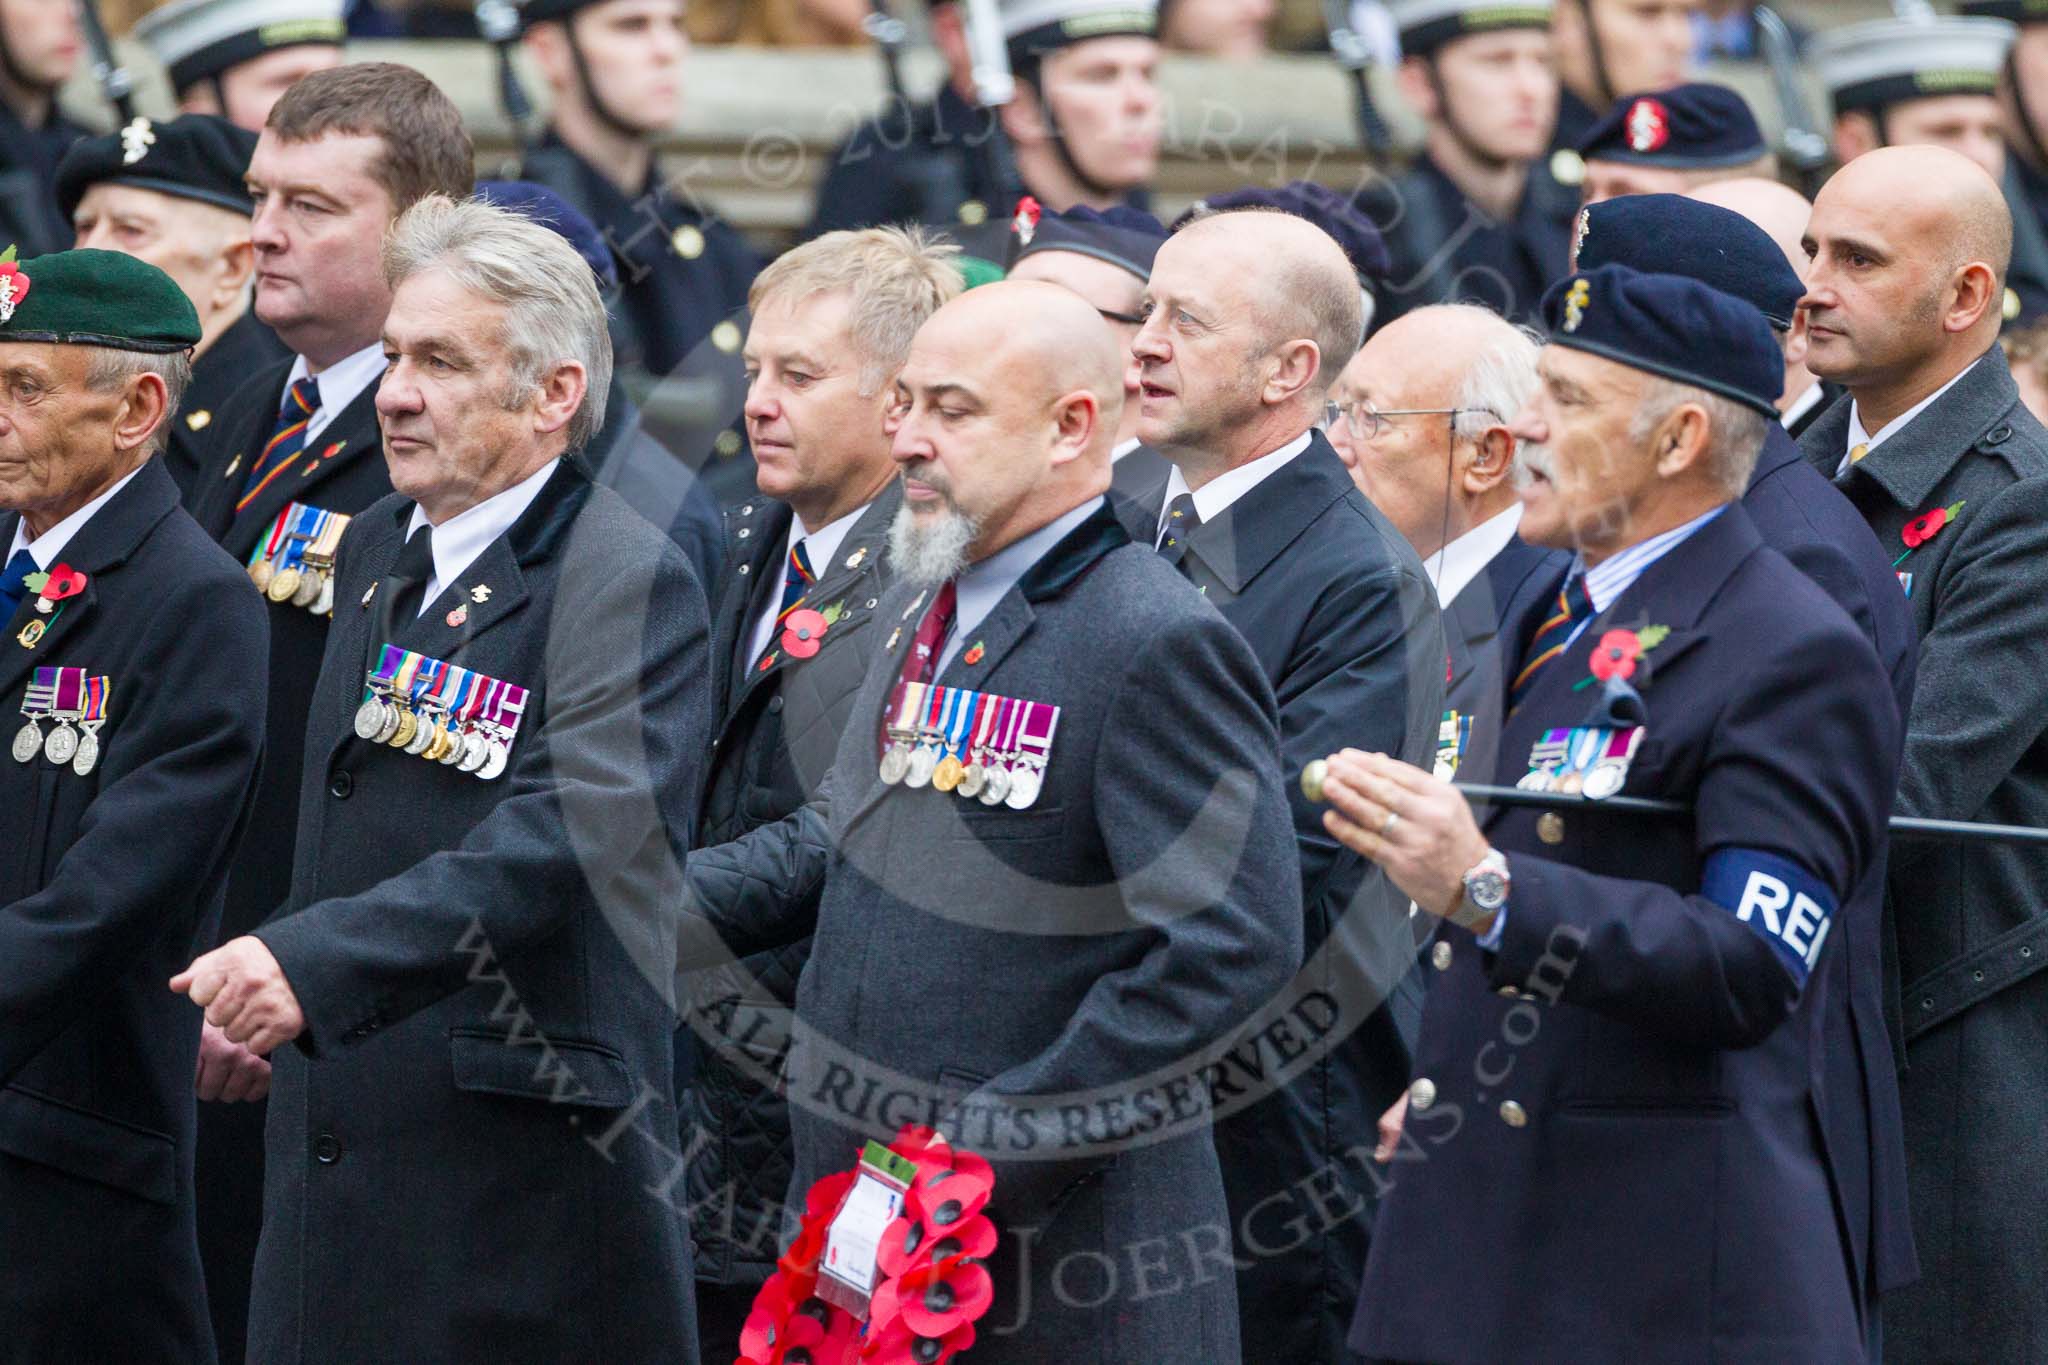 Remembrance Sunday at the Cenotaph 2015: Group B15, Royal Electrical & Mechanical Engineers Association.
Cenotaph, Whitehall, London SW1,
London,
Greater London,
United Kingdom,
on 08 November 2015 at 11:39, image #123